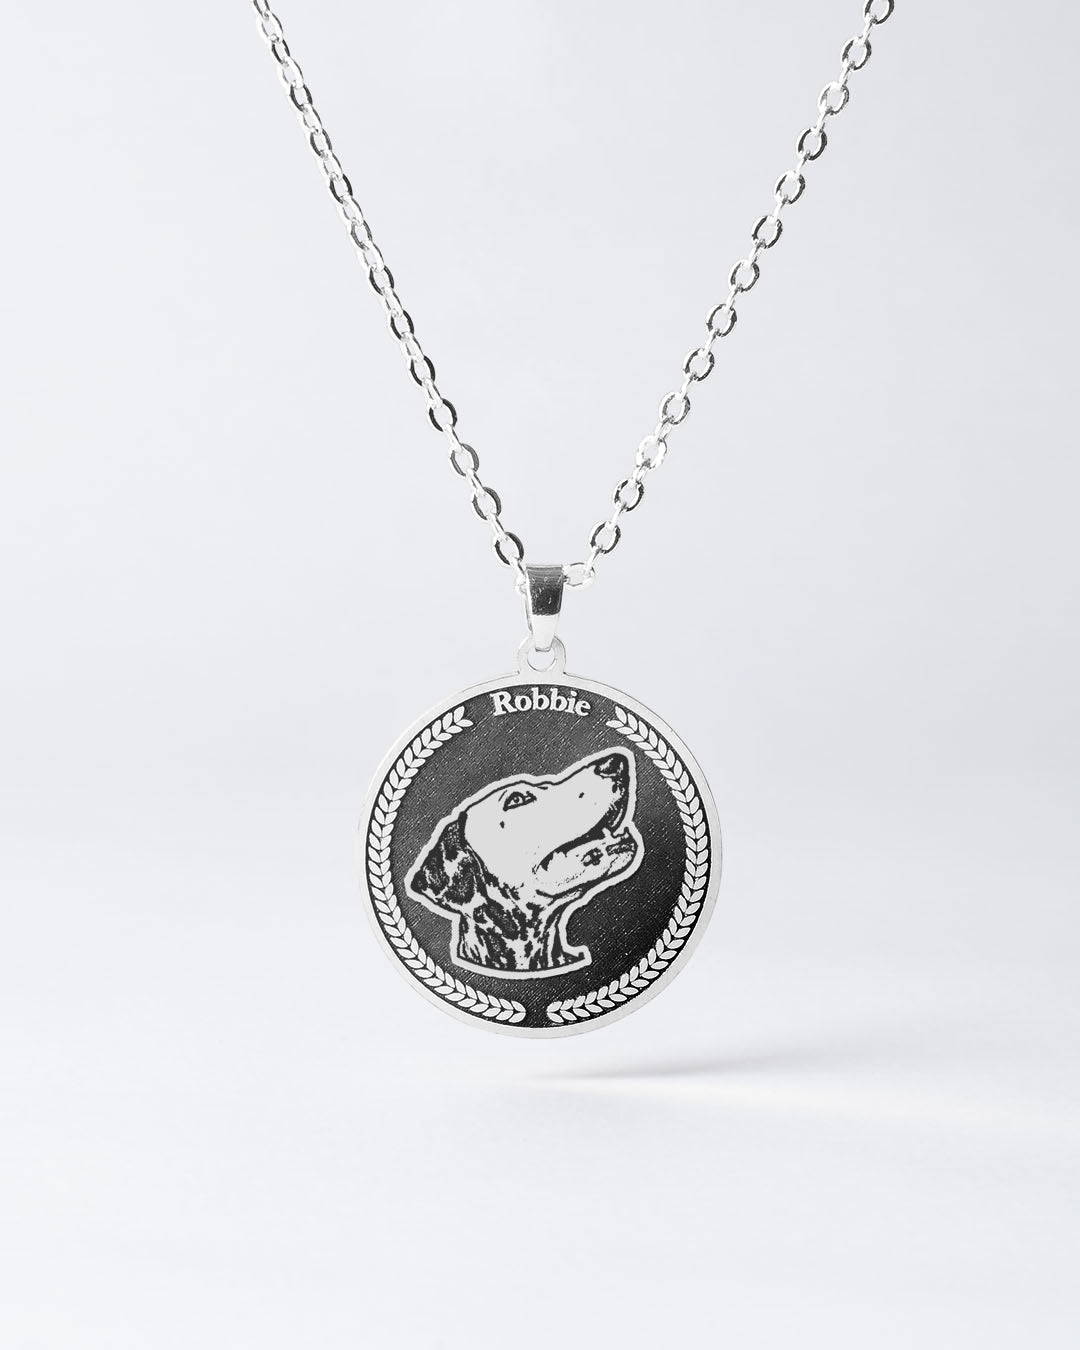 Custom Engraved Black Medallion Dog Necklace with Personalized Photo - Elegant Memorial Gift for Dog Lovers